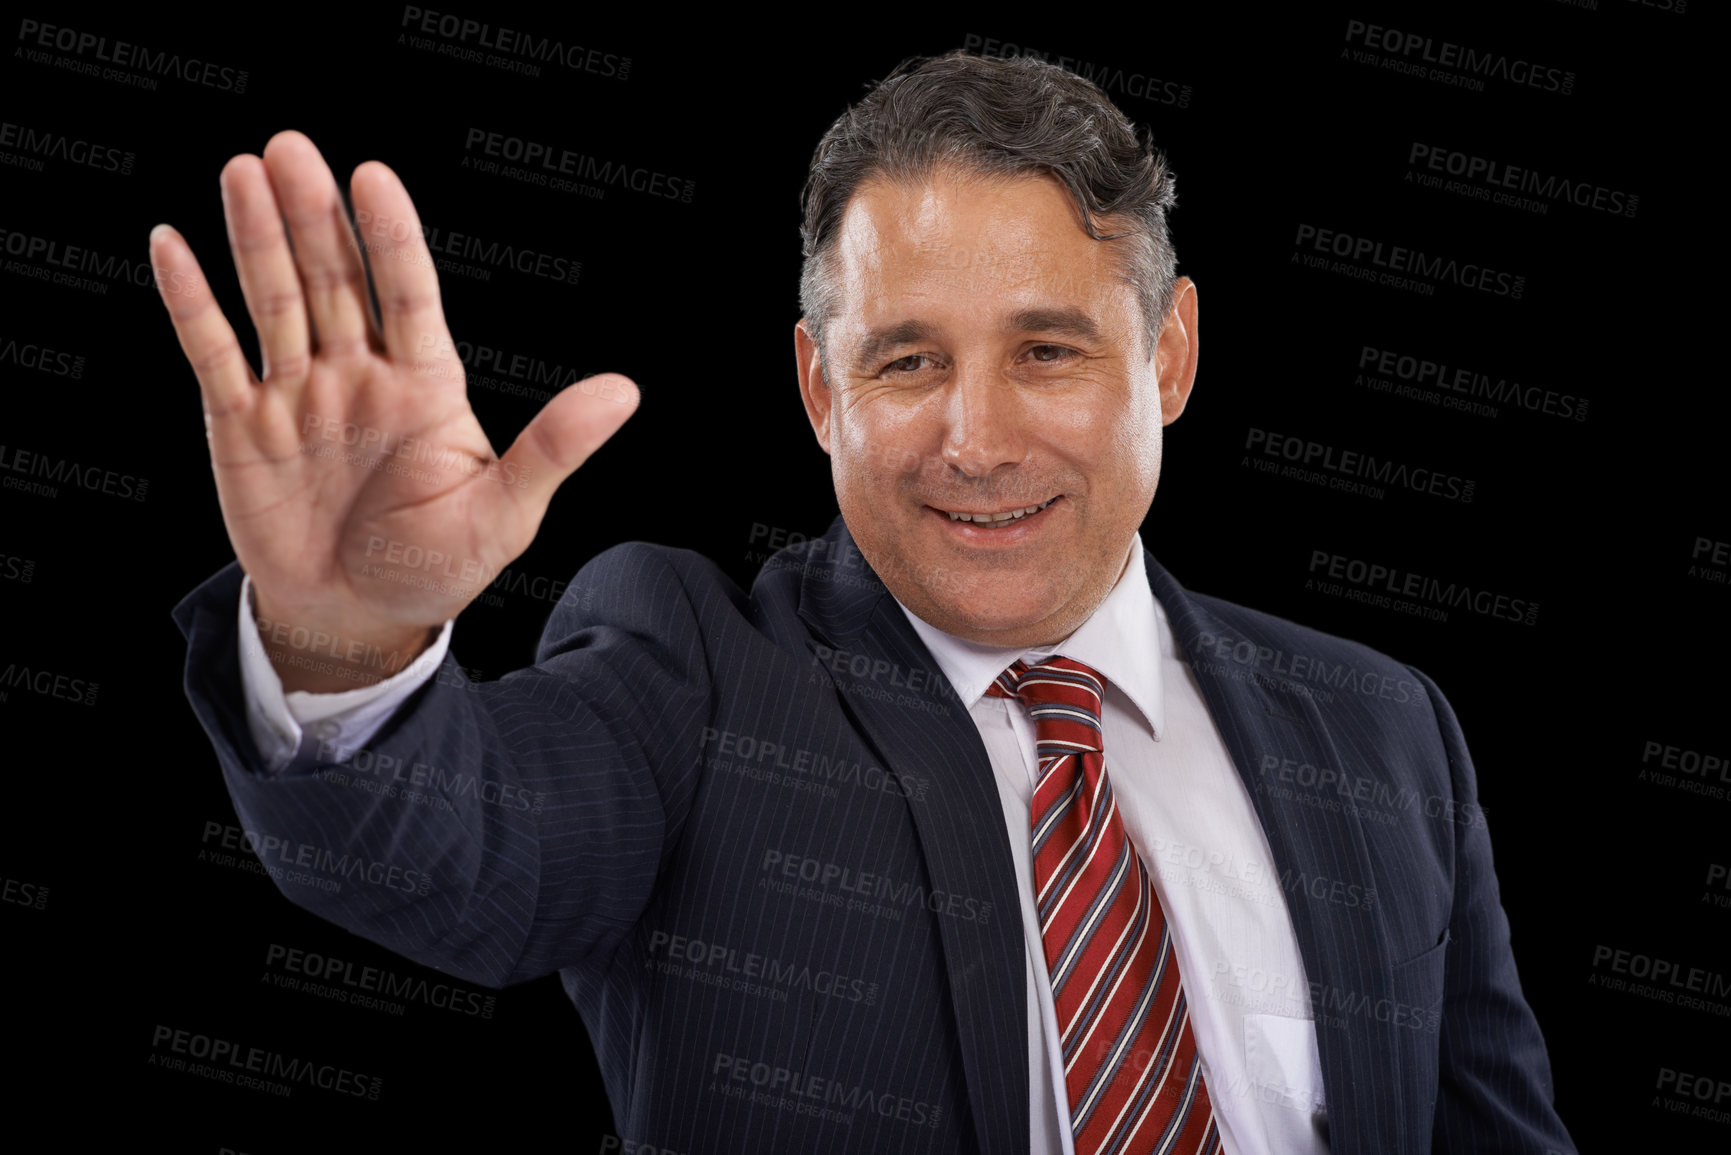 Buy stock photo Government, happy politician and man in studio for wave, greeting and support on black background. Success, political campaign and person with hand gesture for leadership, pride and winning election